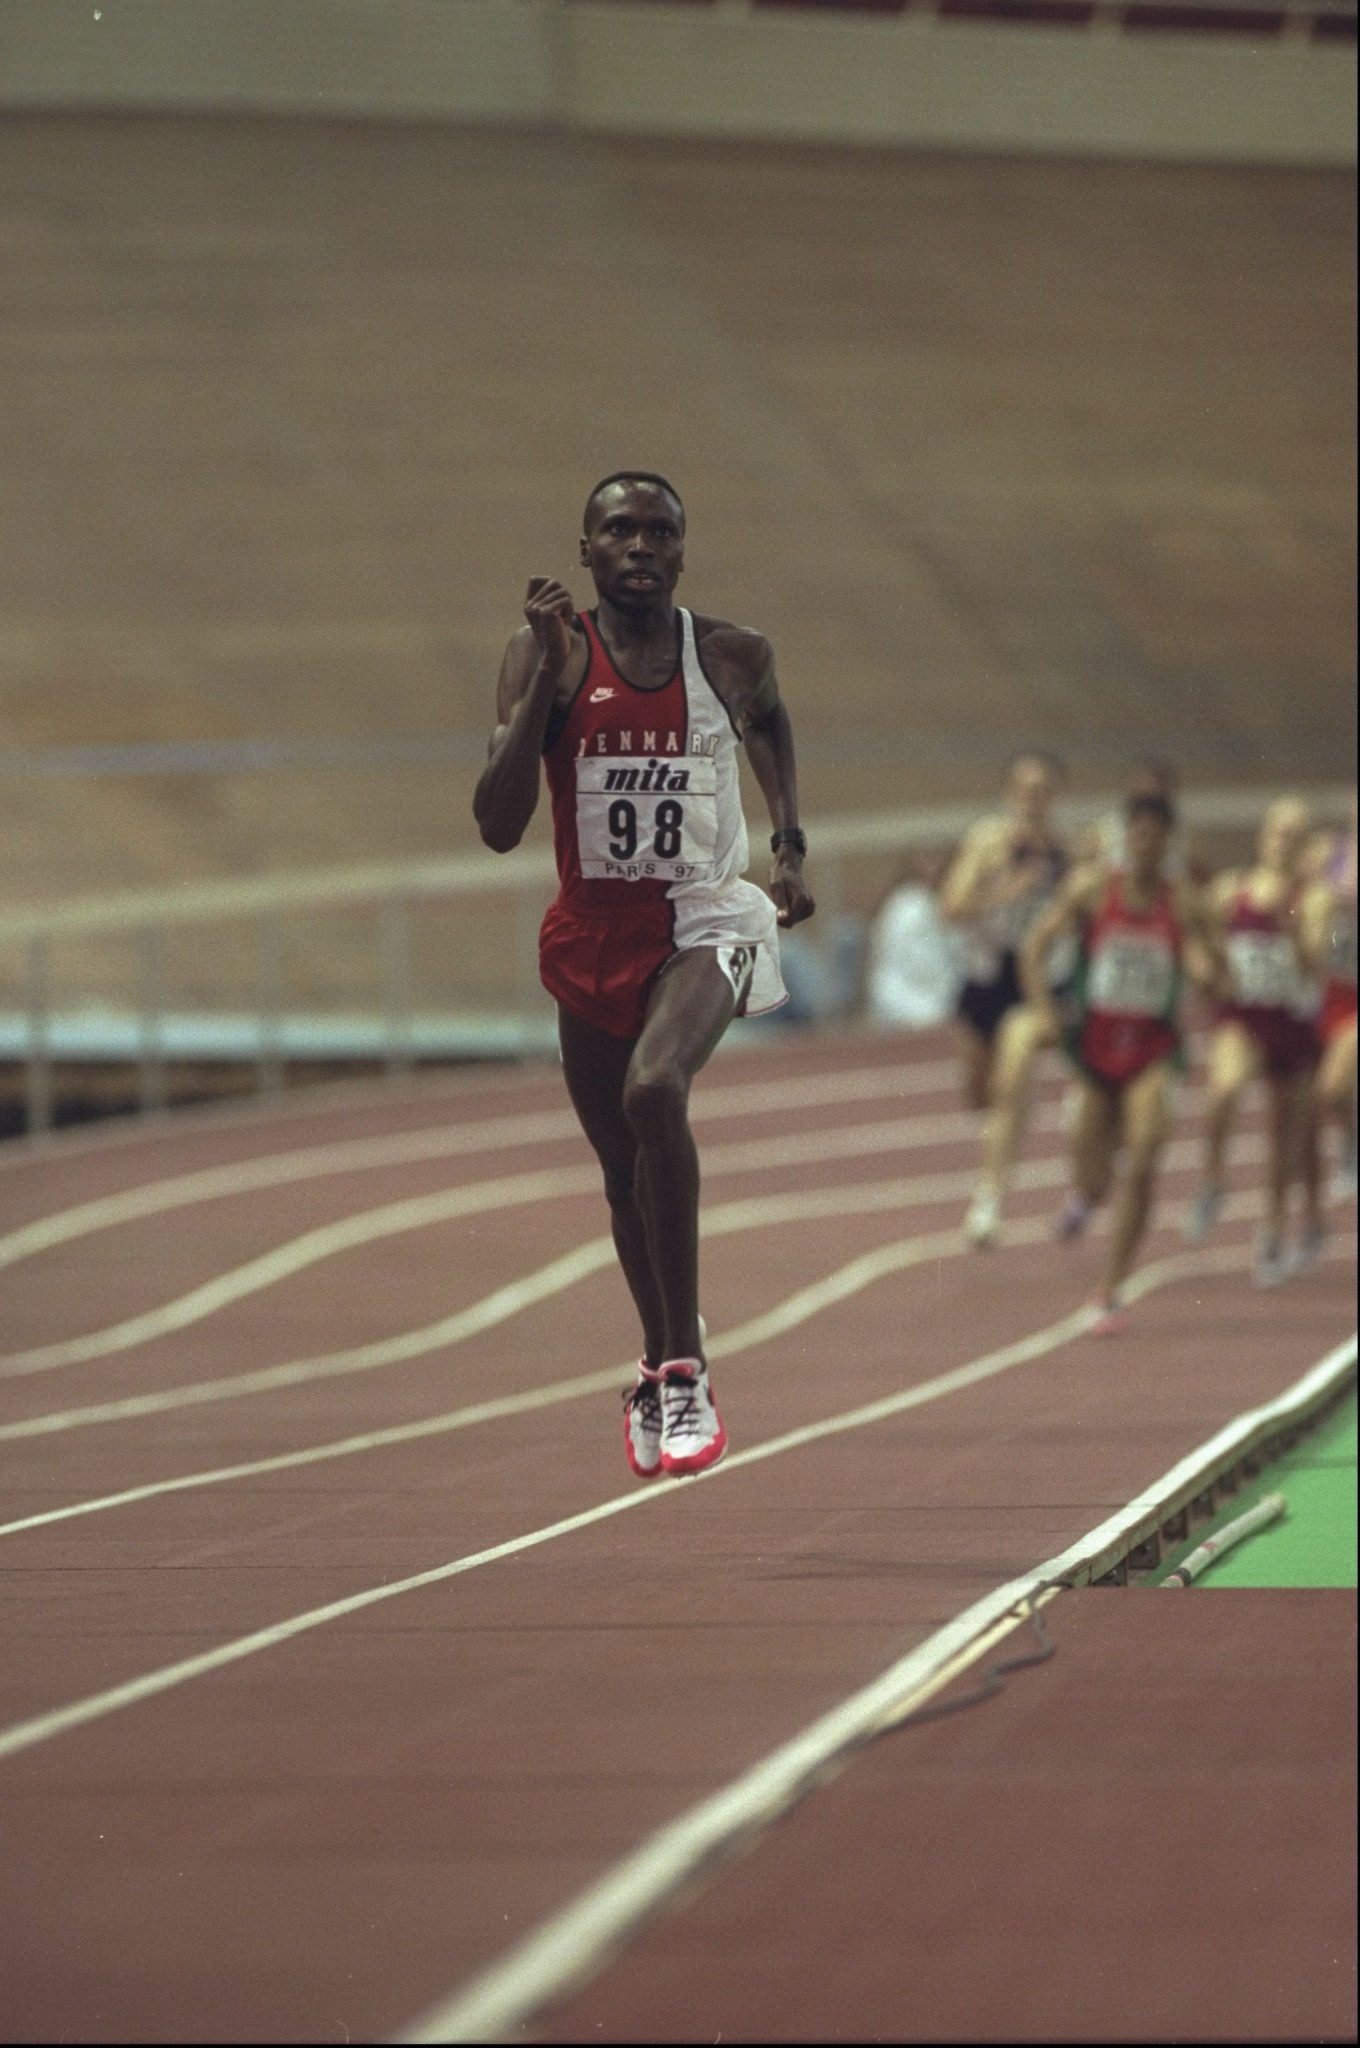 Denmark's Wilson Kipketer, who was originally from Kenya, leads the field at the 1997 IAAF World Indoor Championships in Paris en route to gold in a world record of 1:42.67 ©Getty Images